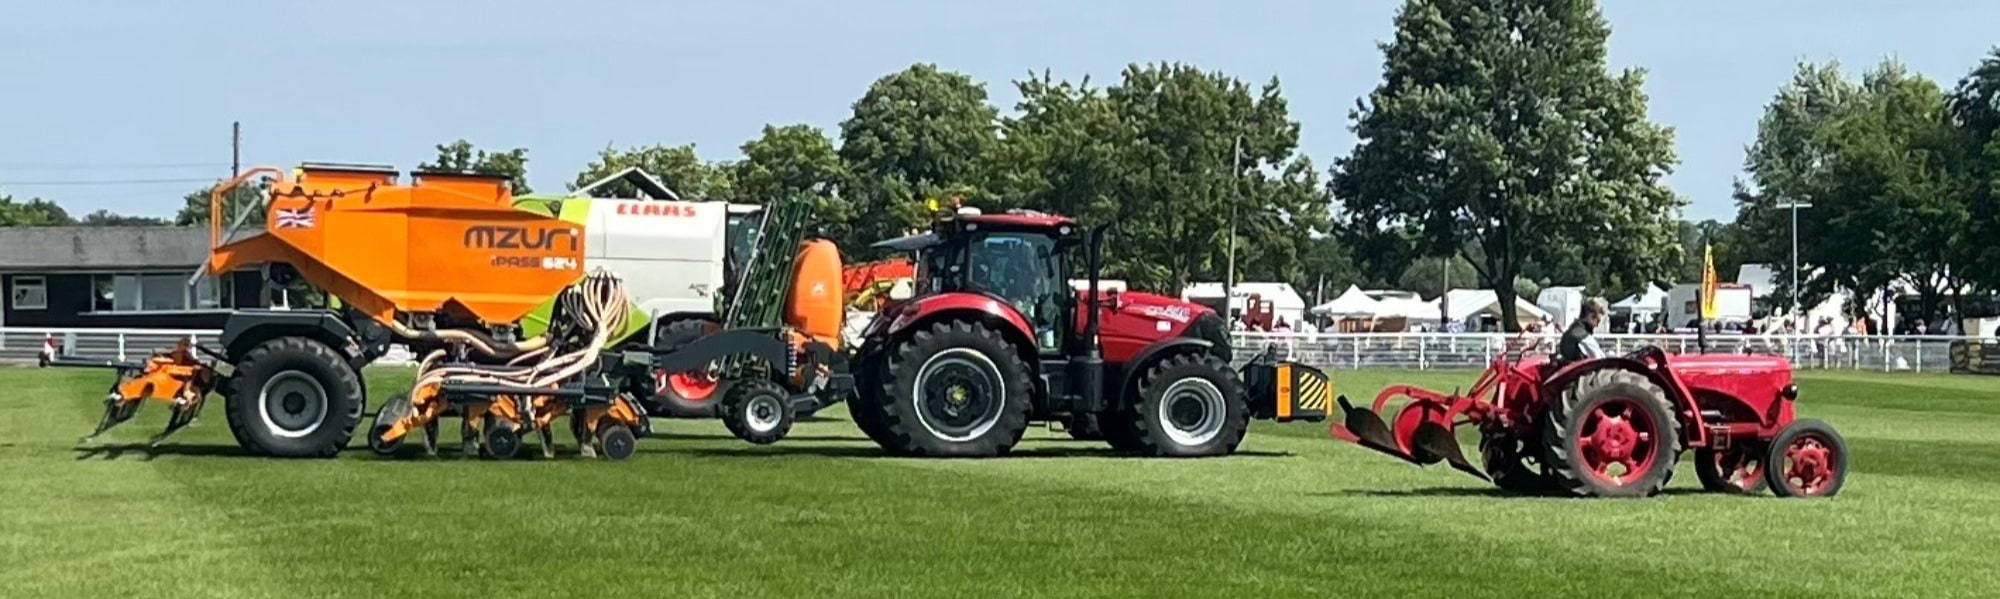 Agricultural Machinery at the Three Counties Show